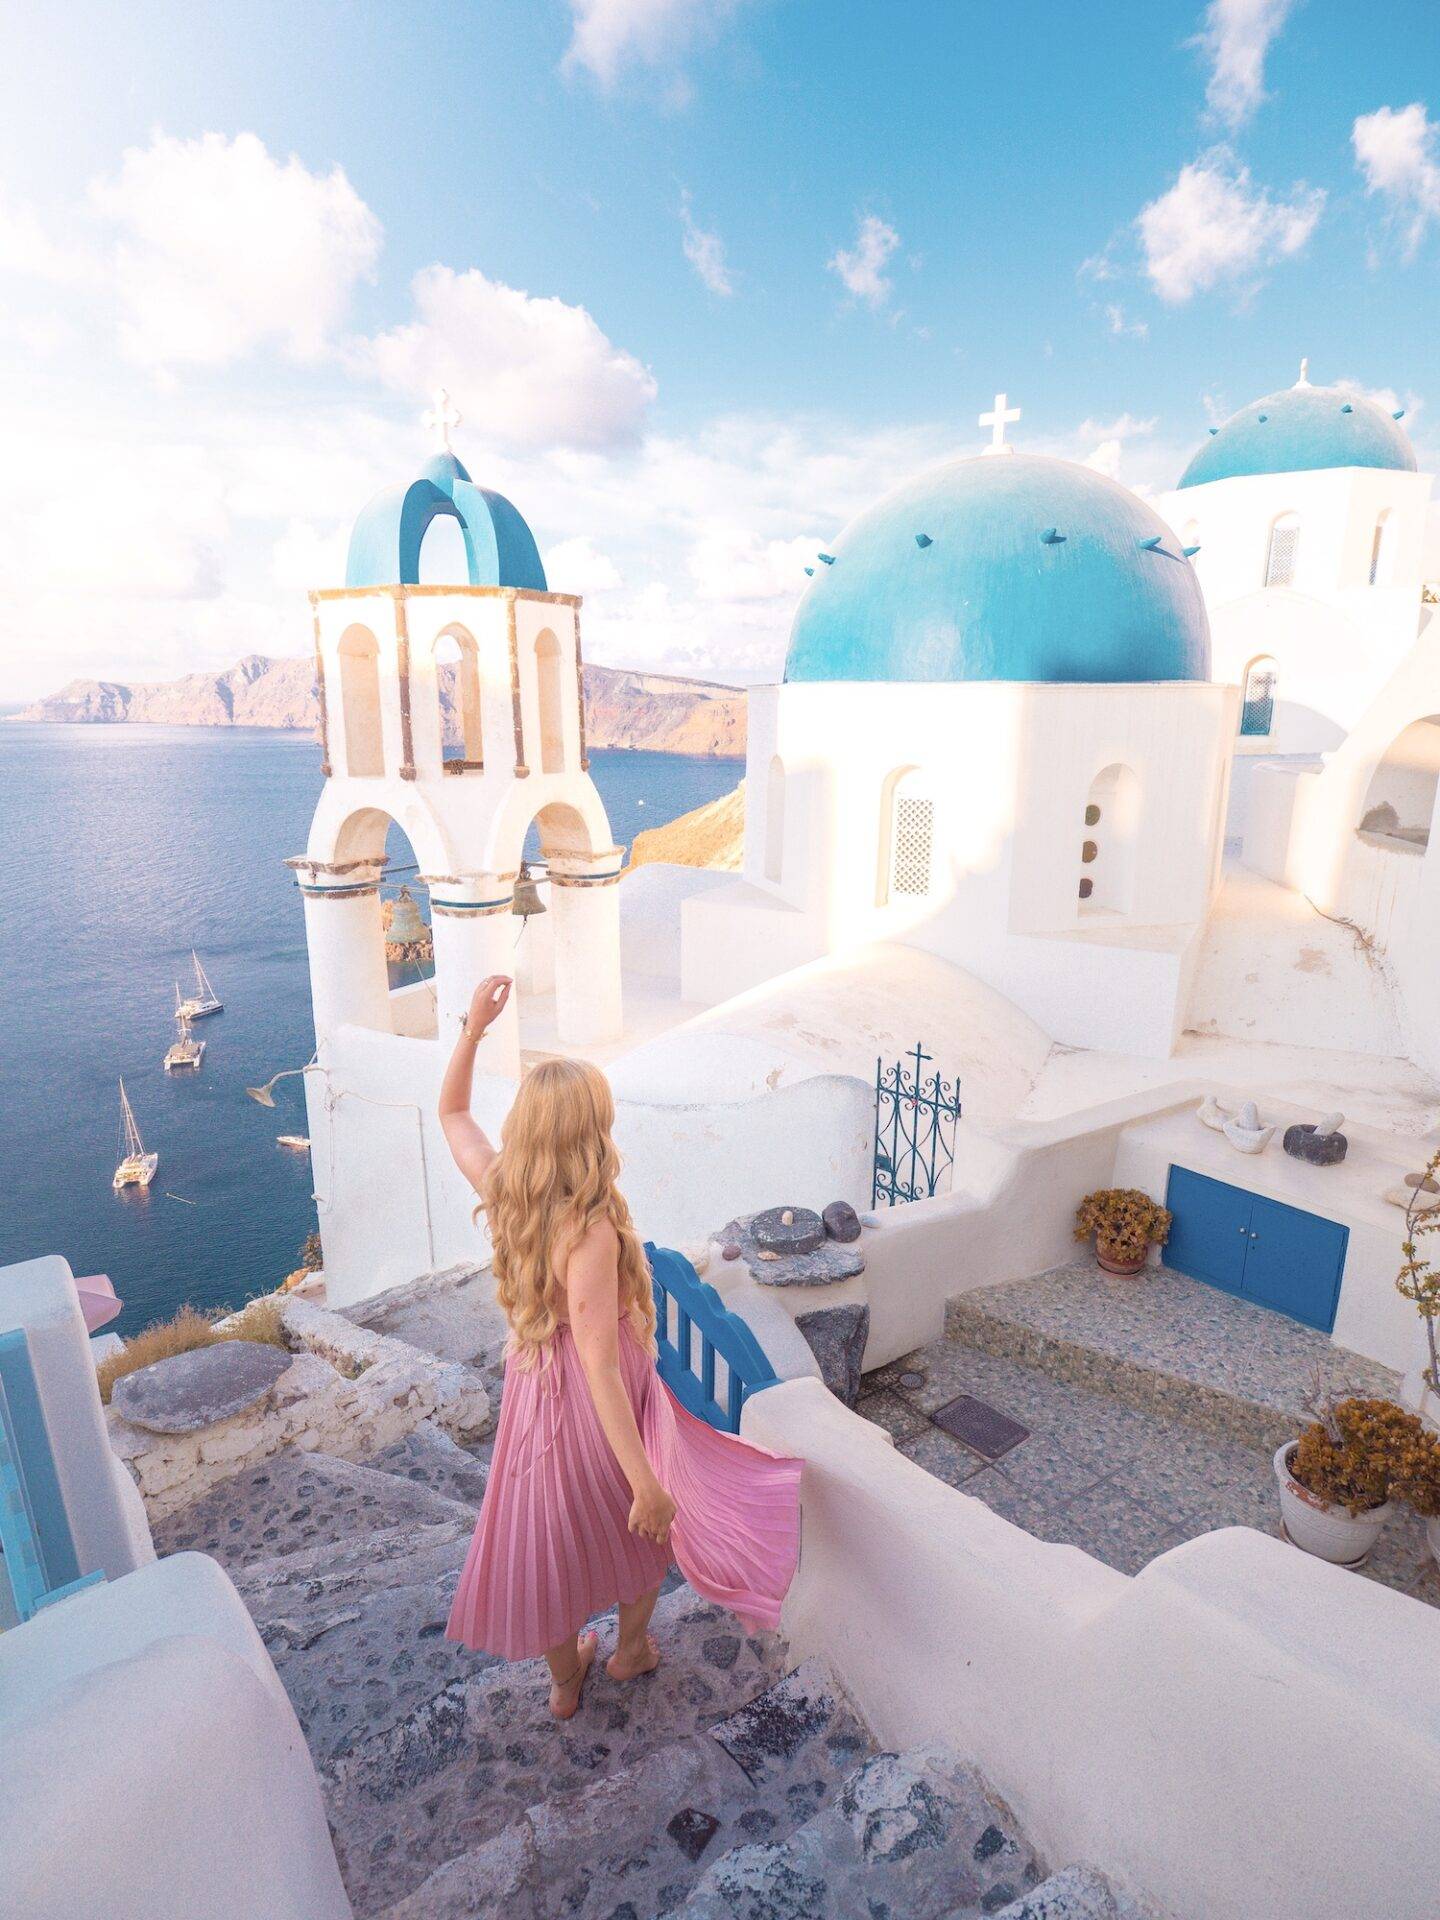 The best photo spots and most instagrammable places in Santorini: Blue Domes of Oia. Click the photo to see the rest of my list of the best instagram photo spots in Santorini!